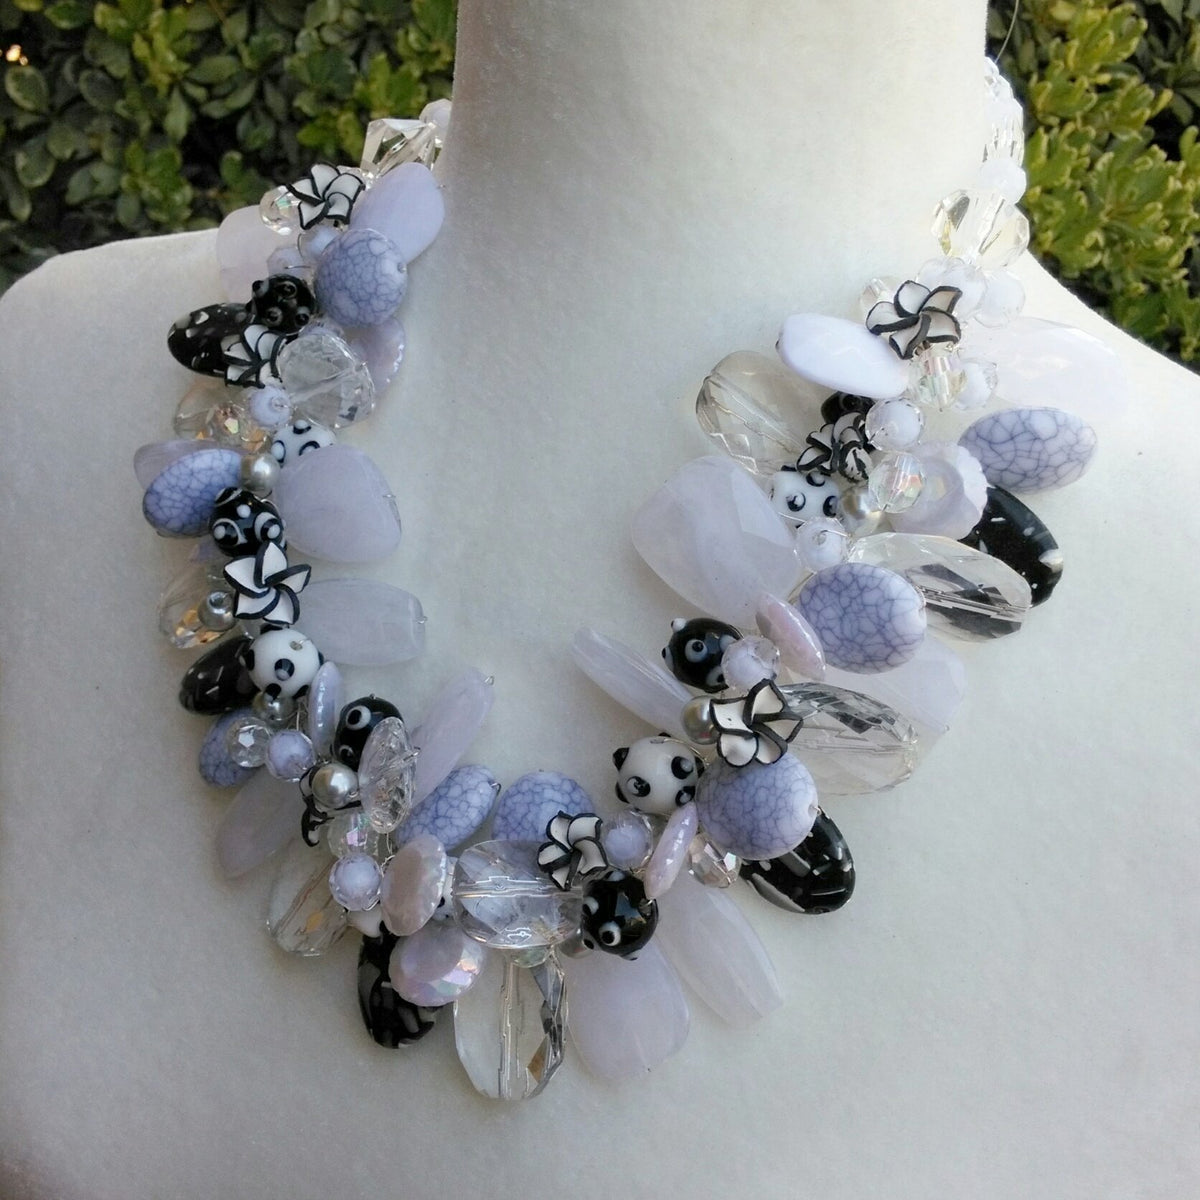 White & Black Chunky Statement Necklace, Unique OOAK Statement Collar, Great Gift for Her